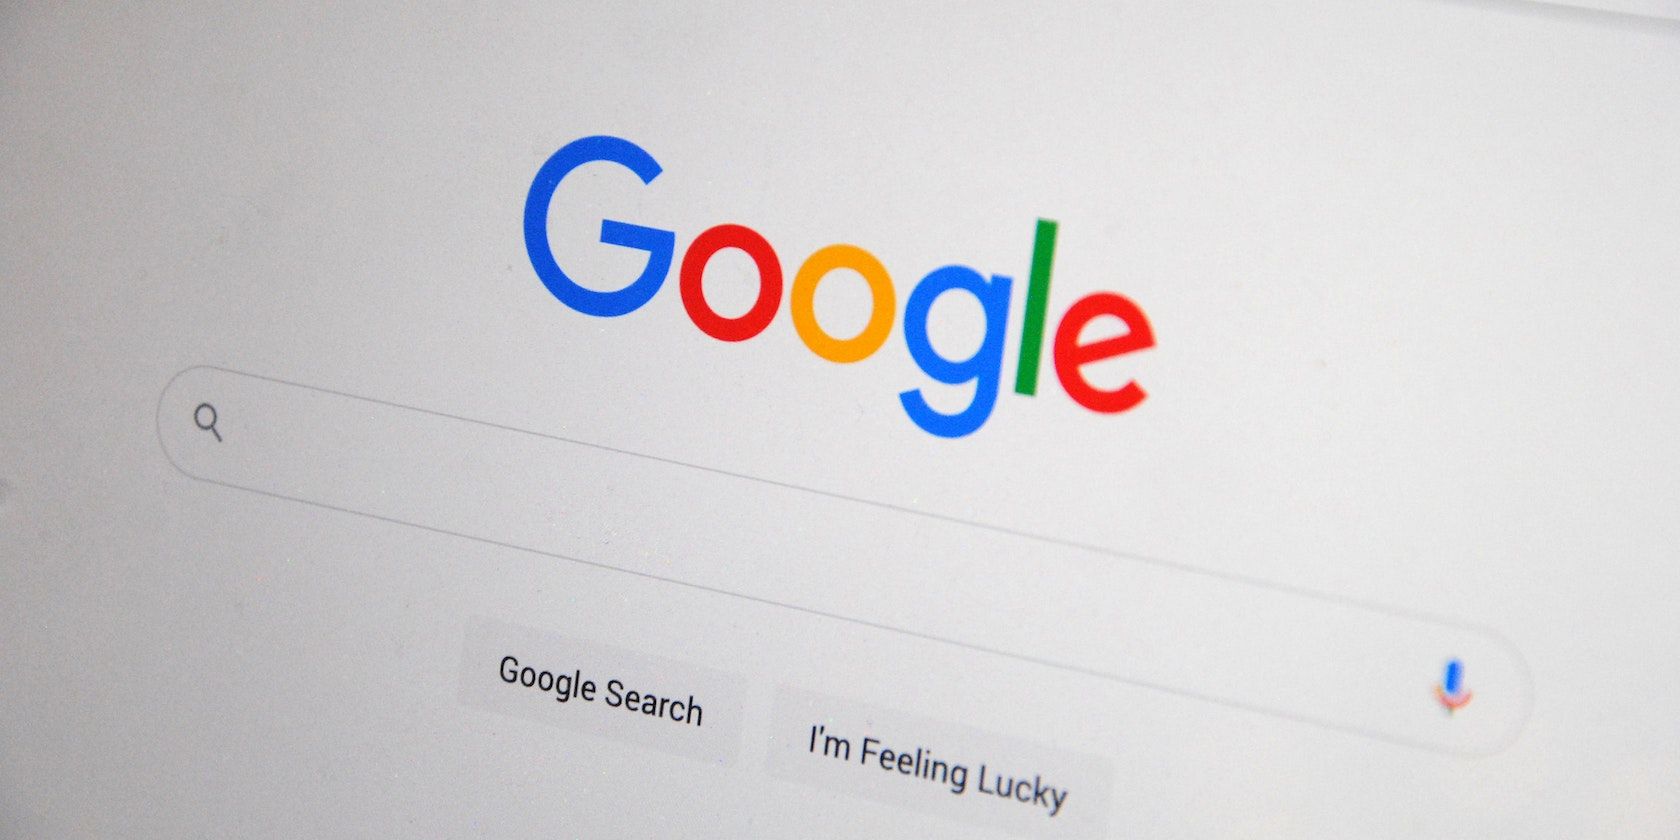 6 Tips to Find Higher Quality Search Results on Google